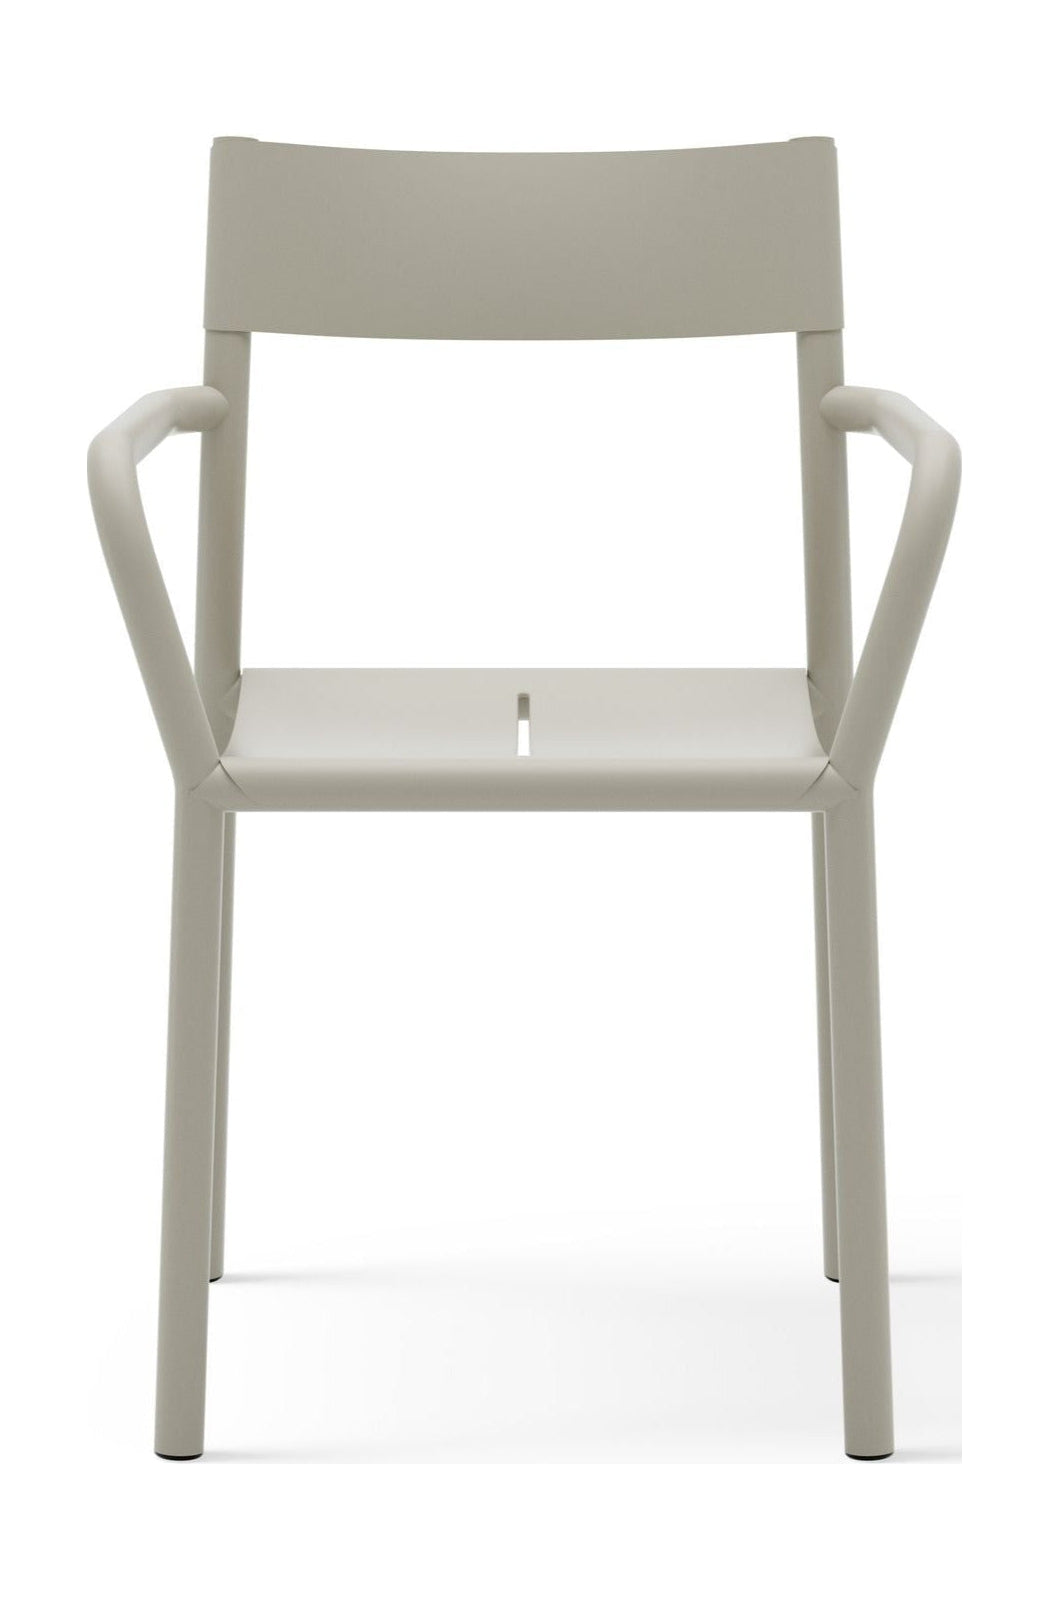 New Works Mai fauteuil, gris clair